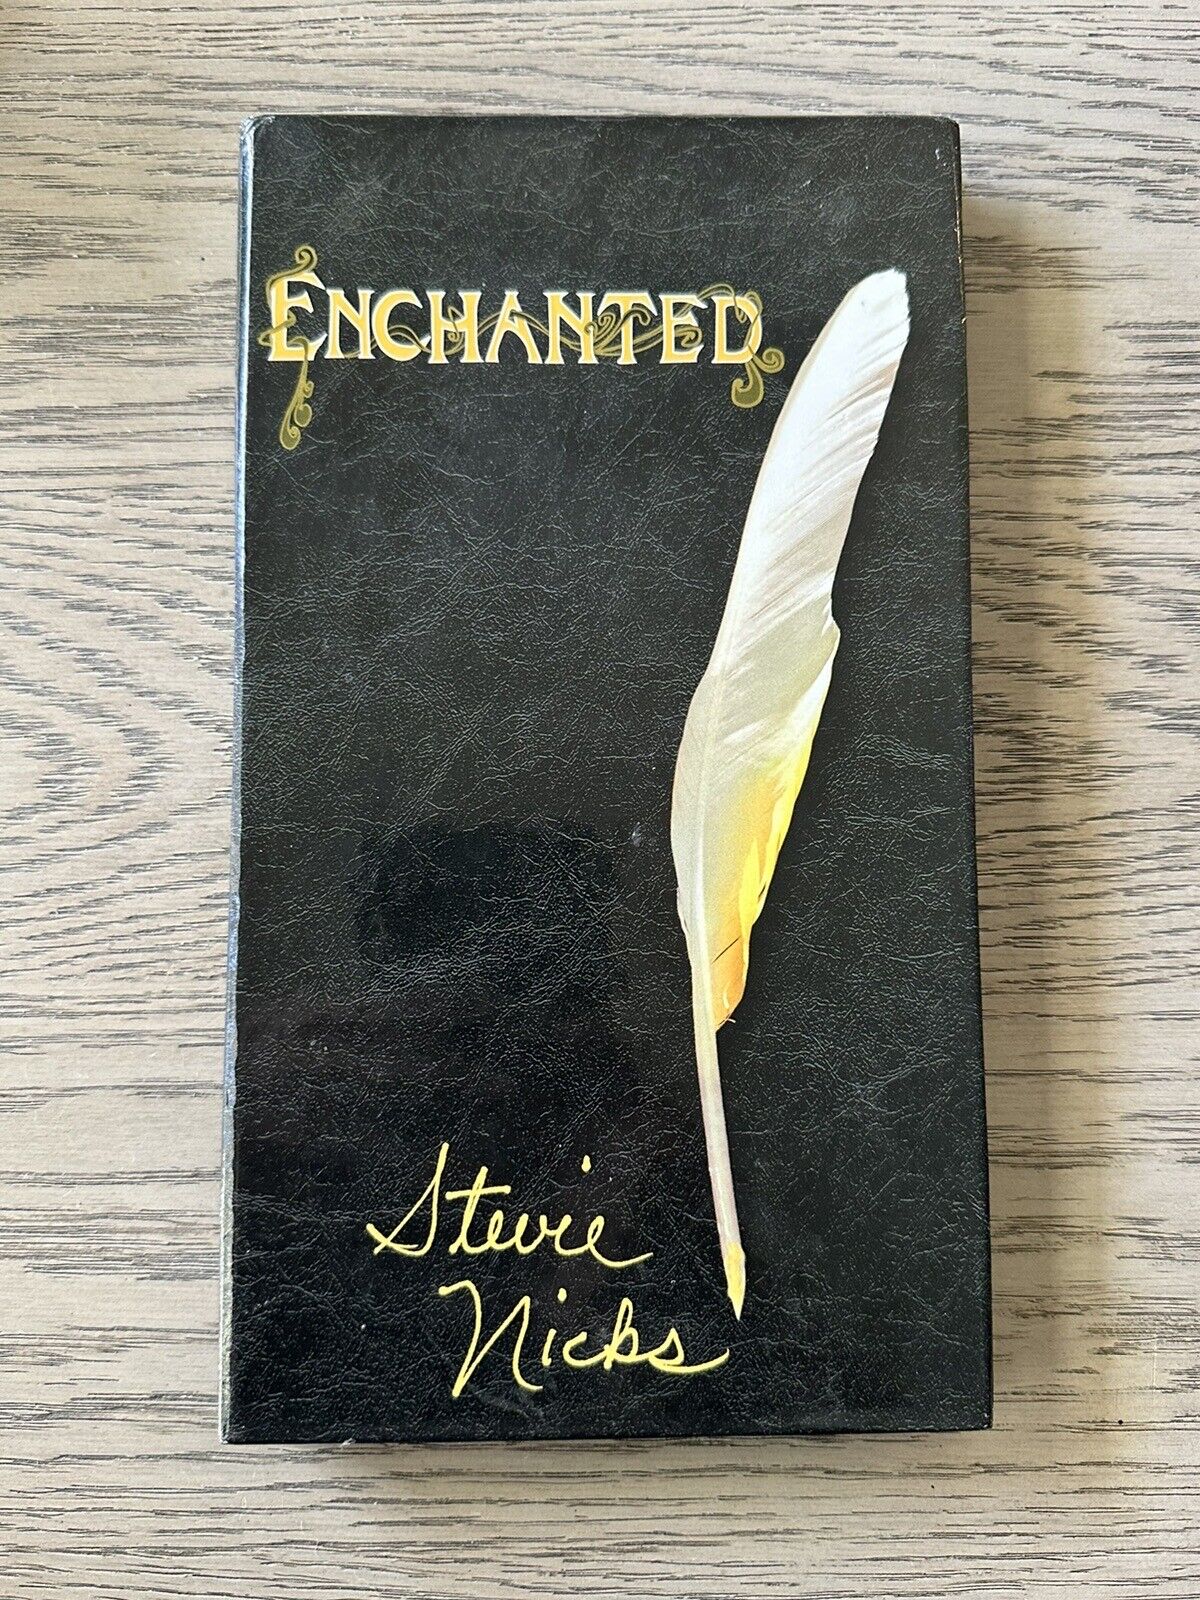 Stevie Nicks Enchanted Collection CD Book Great Shape Vintage